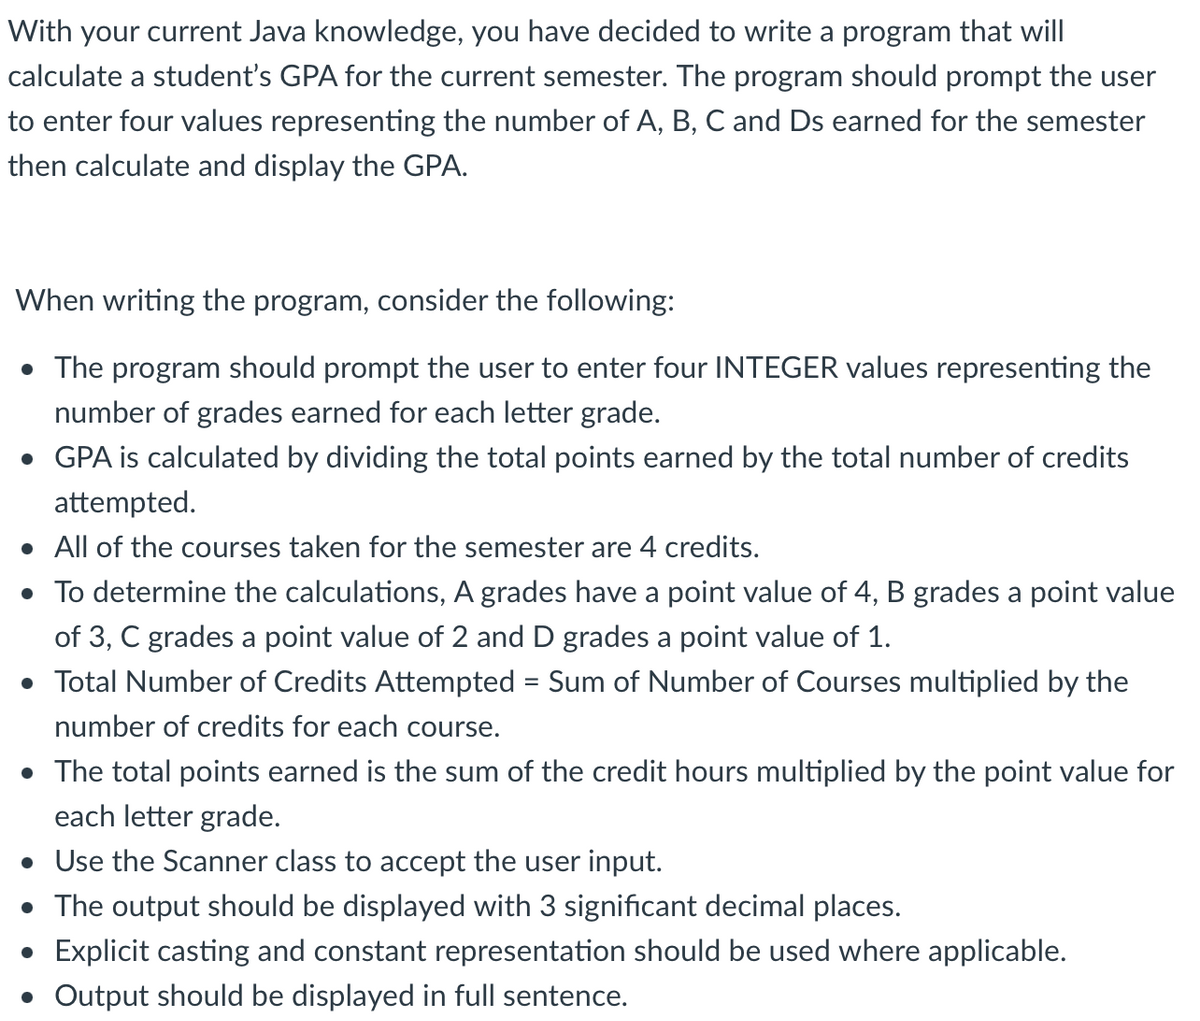 With your current Java knowledge, you have decided to write a program that will
calculate a student's GPA for the current semester. The program should prompt the user
to enter four values representing the number of A, B, C and Ds earned for the semester
then calculate and display the GPA.
When writing the program, consider the following:
• The program should prompt the user to enter four INTEGER values representing the
number of grades earned for each letter grade.
• GPA is calculated by dividing the total points earned by the total number of credits
attempted.
• All of the courses taken for the semester are 4 credits.
• To determine the calculations, A grades have a point value of 4, B grades a point value
of 3, C grades a point value of 2 and D grades a point value of 1.
• Total Number of Credits Attempted = Sum of Number of Courses multiplied by the
number of credits for each course.
• The total points earned is the sum of the credit hours multiplied by the point value for
each letter grade.
• Use the Scanner class to accept the user input.
• The output should be displayed with 3 significant decimal places.
• Explicit casting and constant representation should be used where applicable.
• Output should be displayed in full sentence.